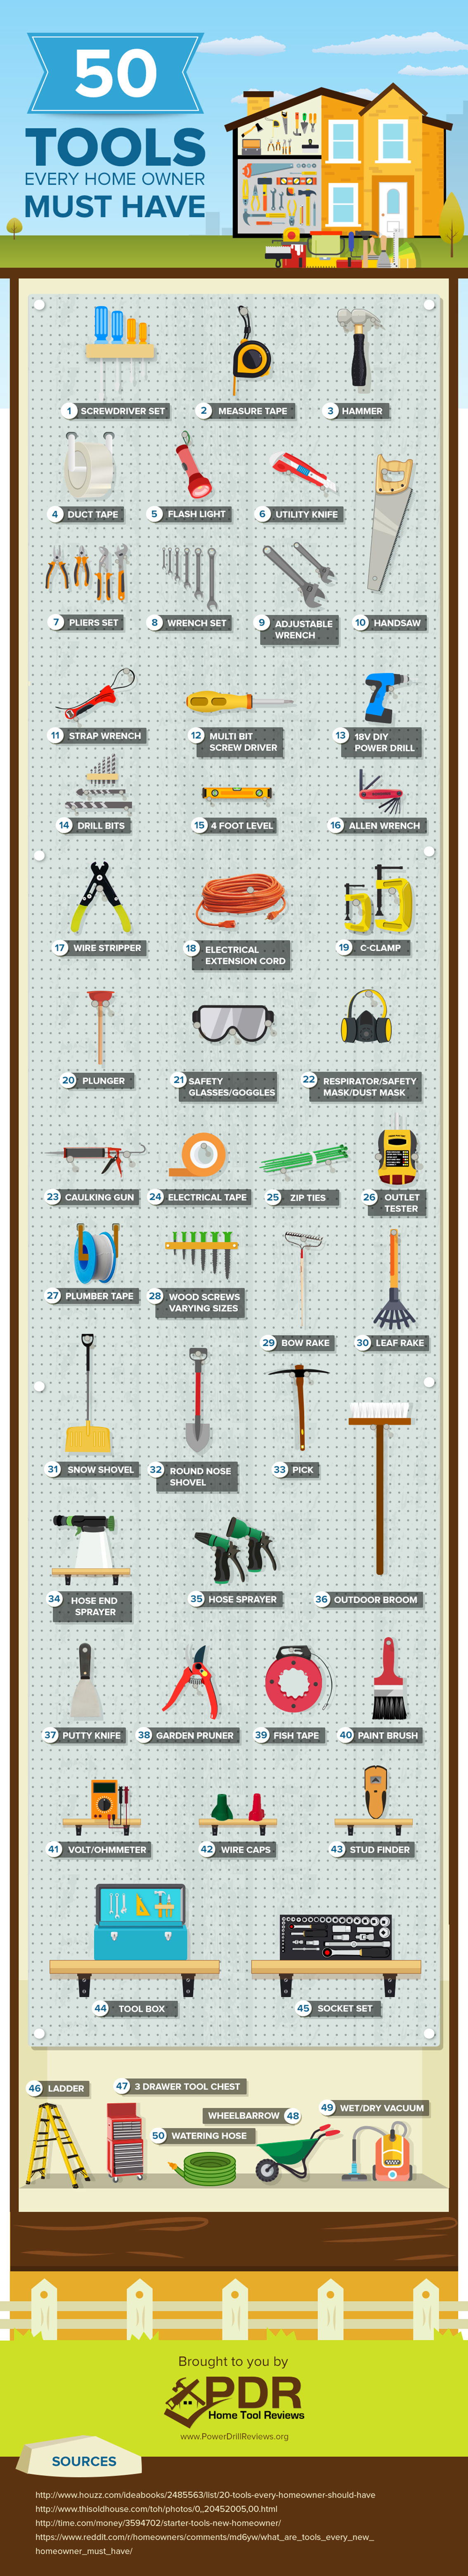 Must Have Home Improvement Tools - Home Repair Infographic